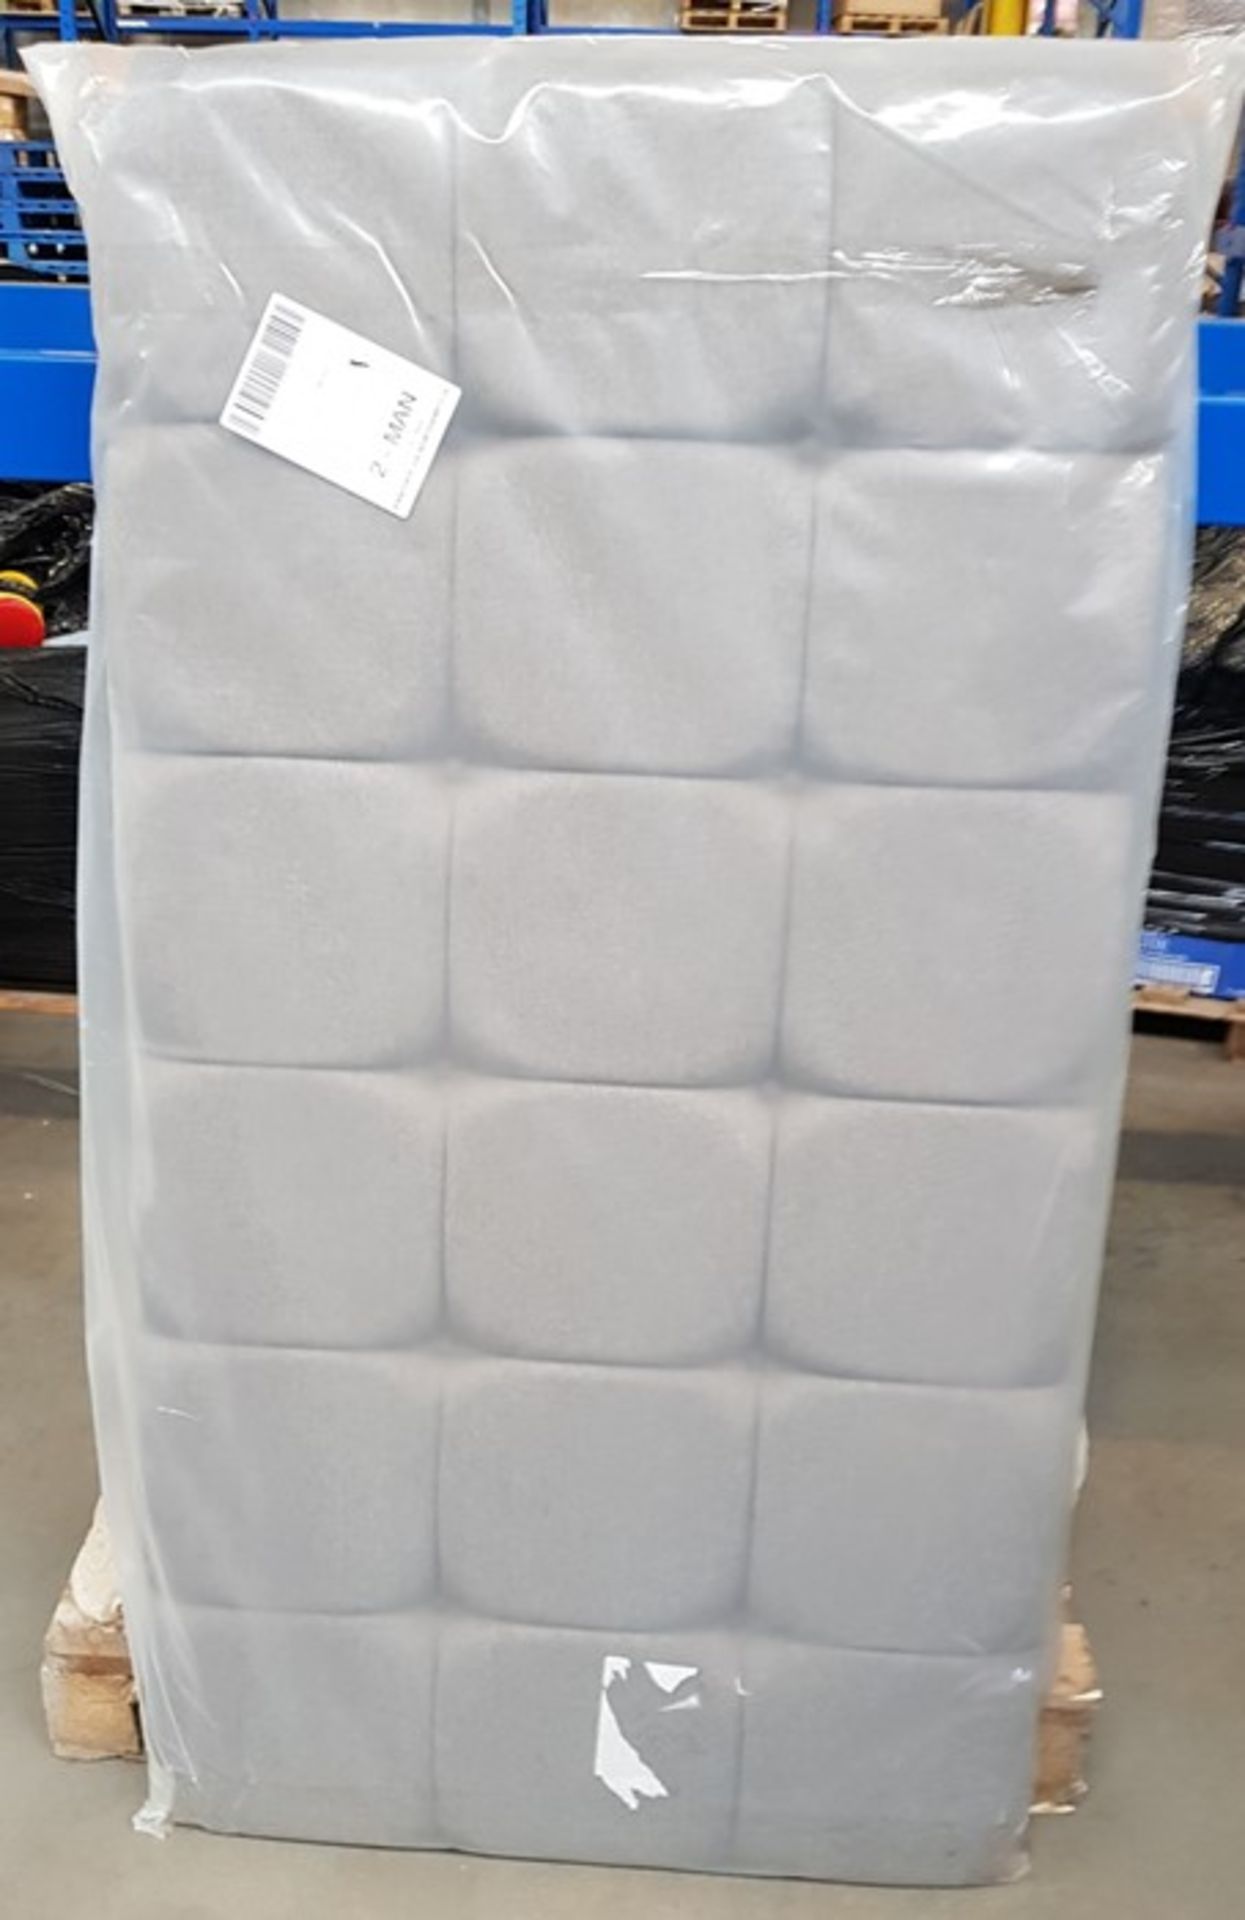 1 BAGGED 150CM KING SIZE HEADBOARD IN GREY / RRP £89.99 (PUBLIC VIEWING AVAILABLE)